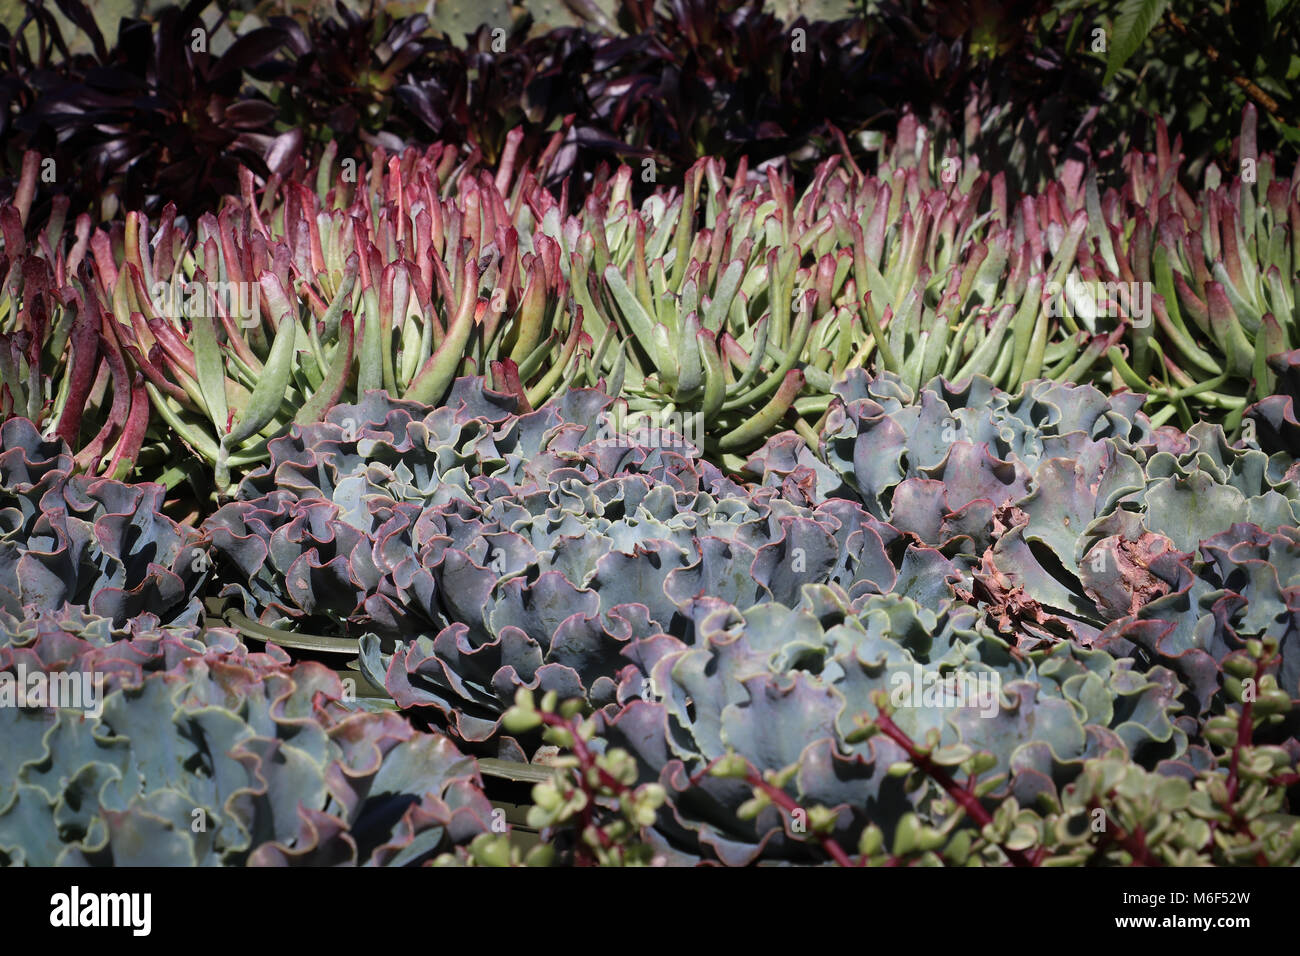 Rows of colorful succulent plants on display in a garden shop, where they are sold for ornamental plantings for drought tolerant gardening; xeriscape. Stock Photo